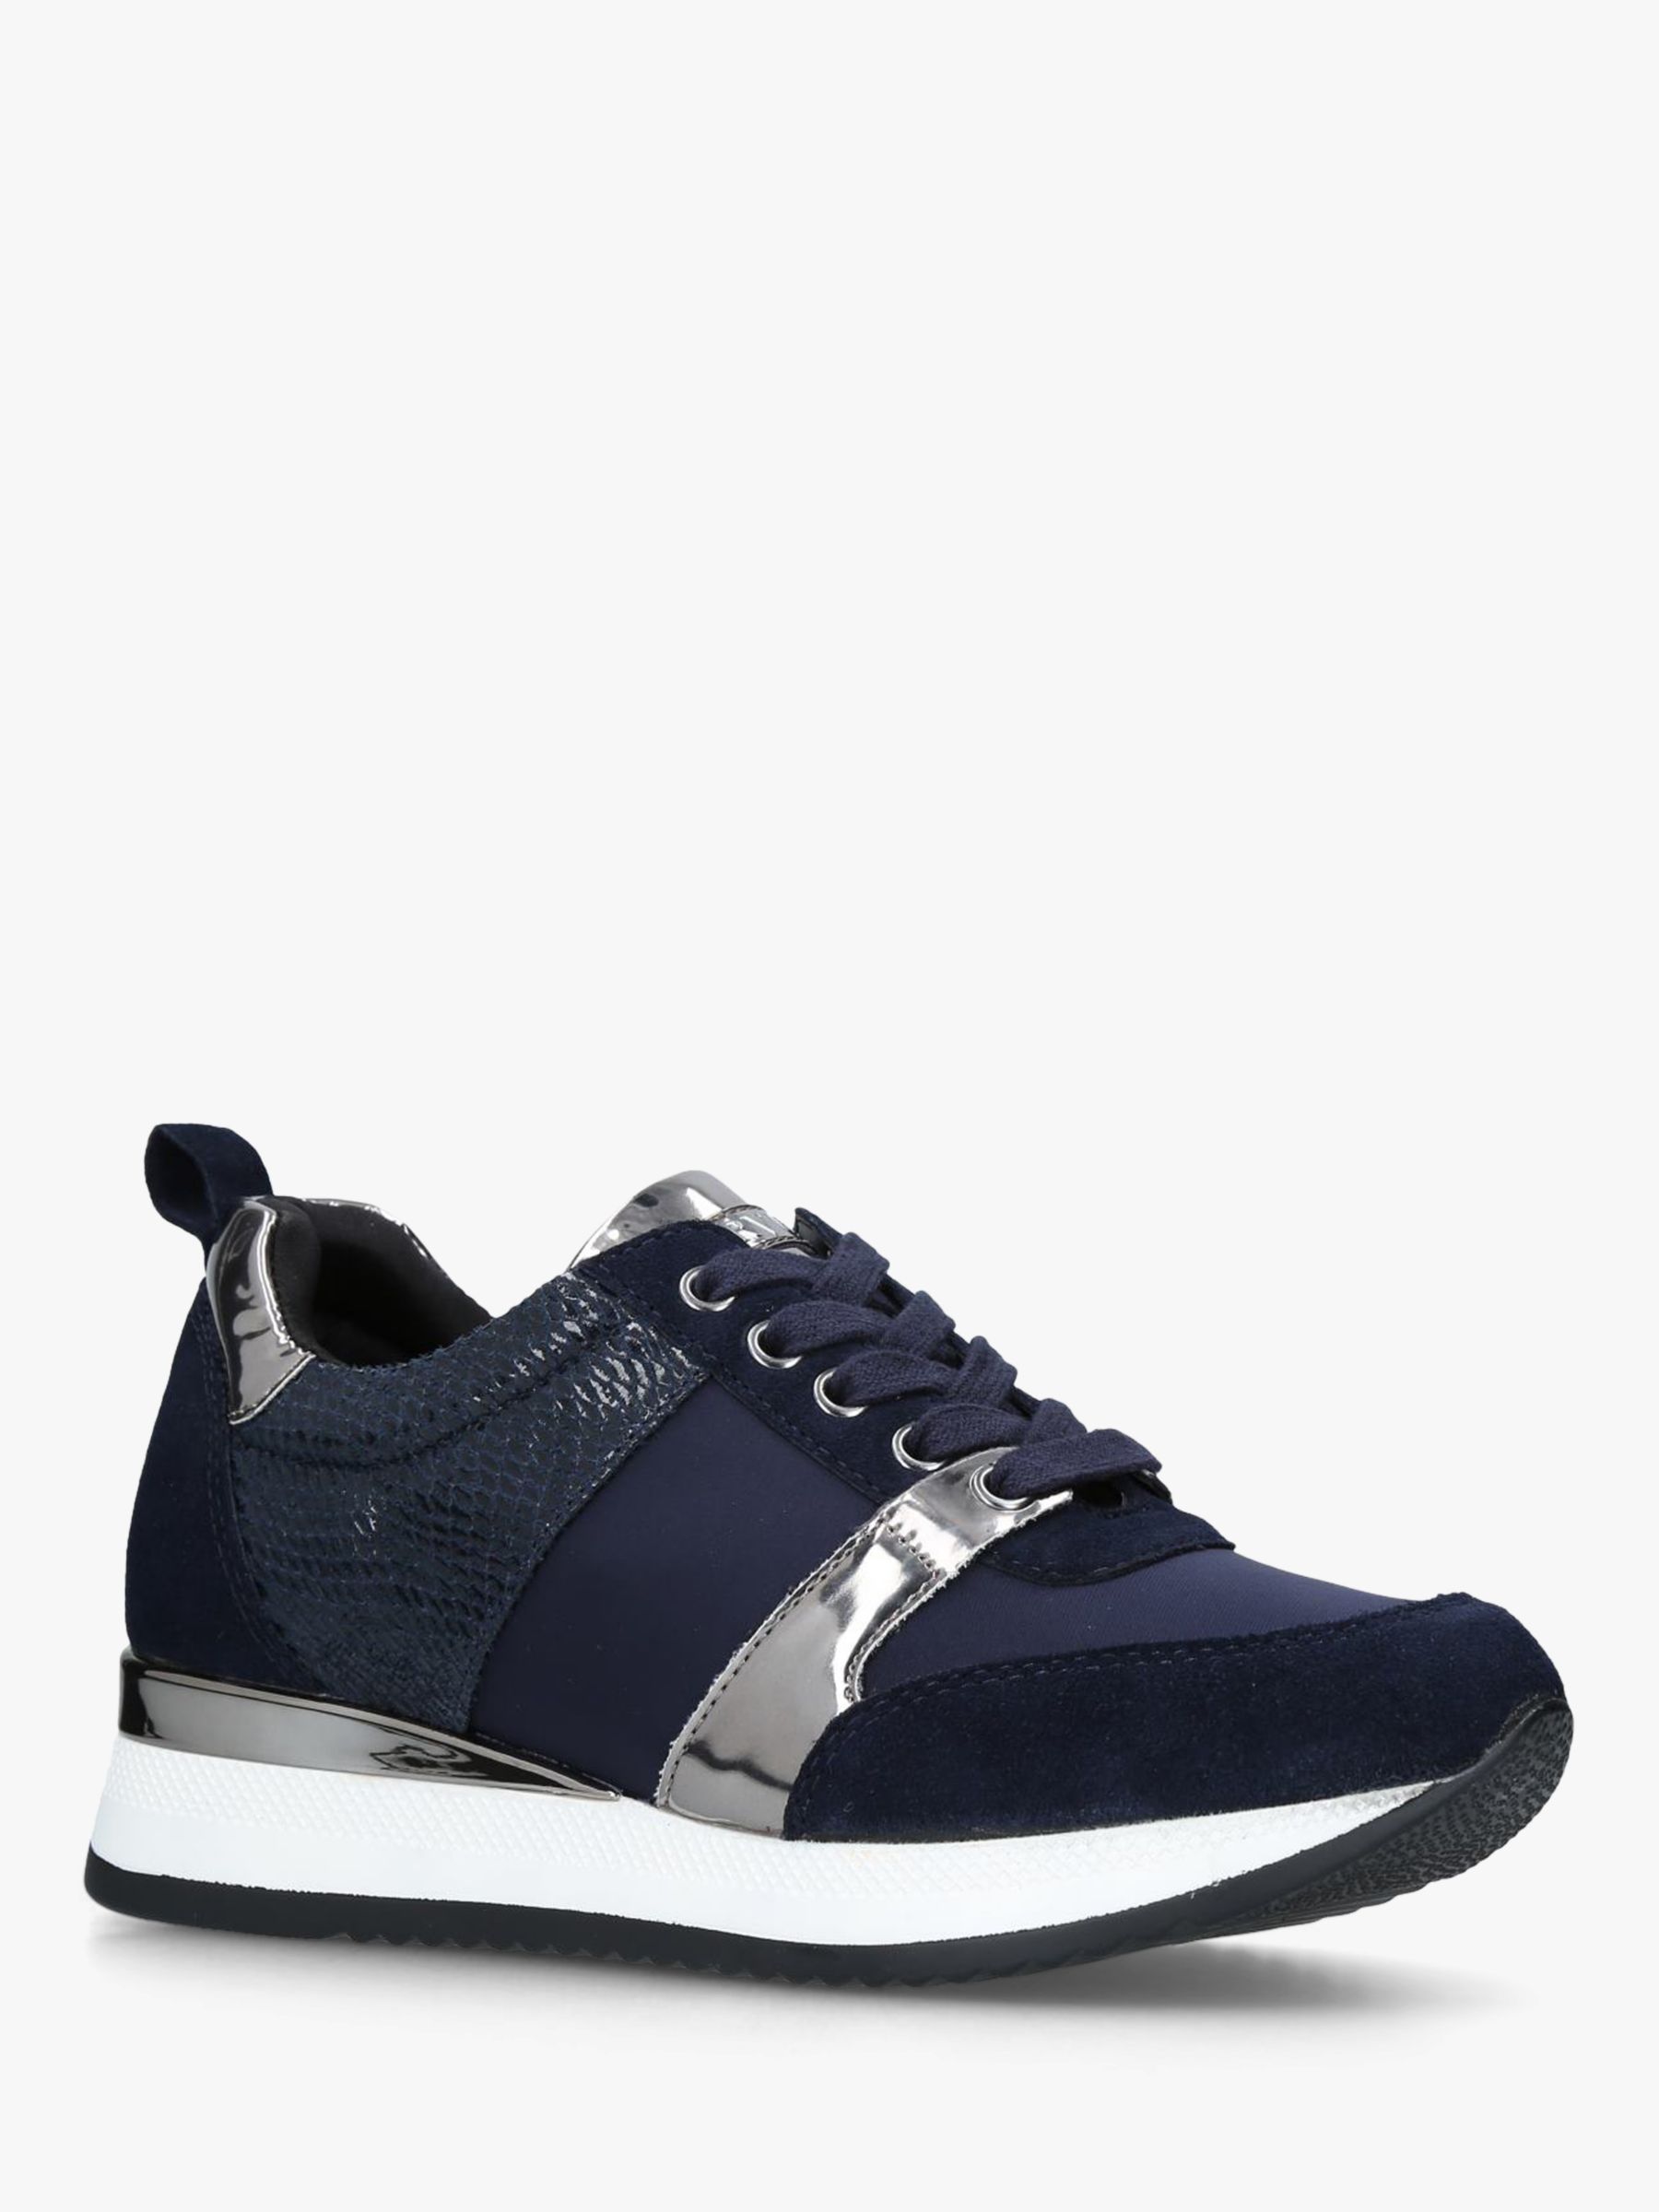 Carvela Justified Glitter Low Top Trainers, Navy at John Lewis & Partners